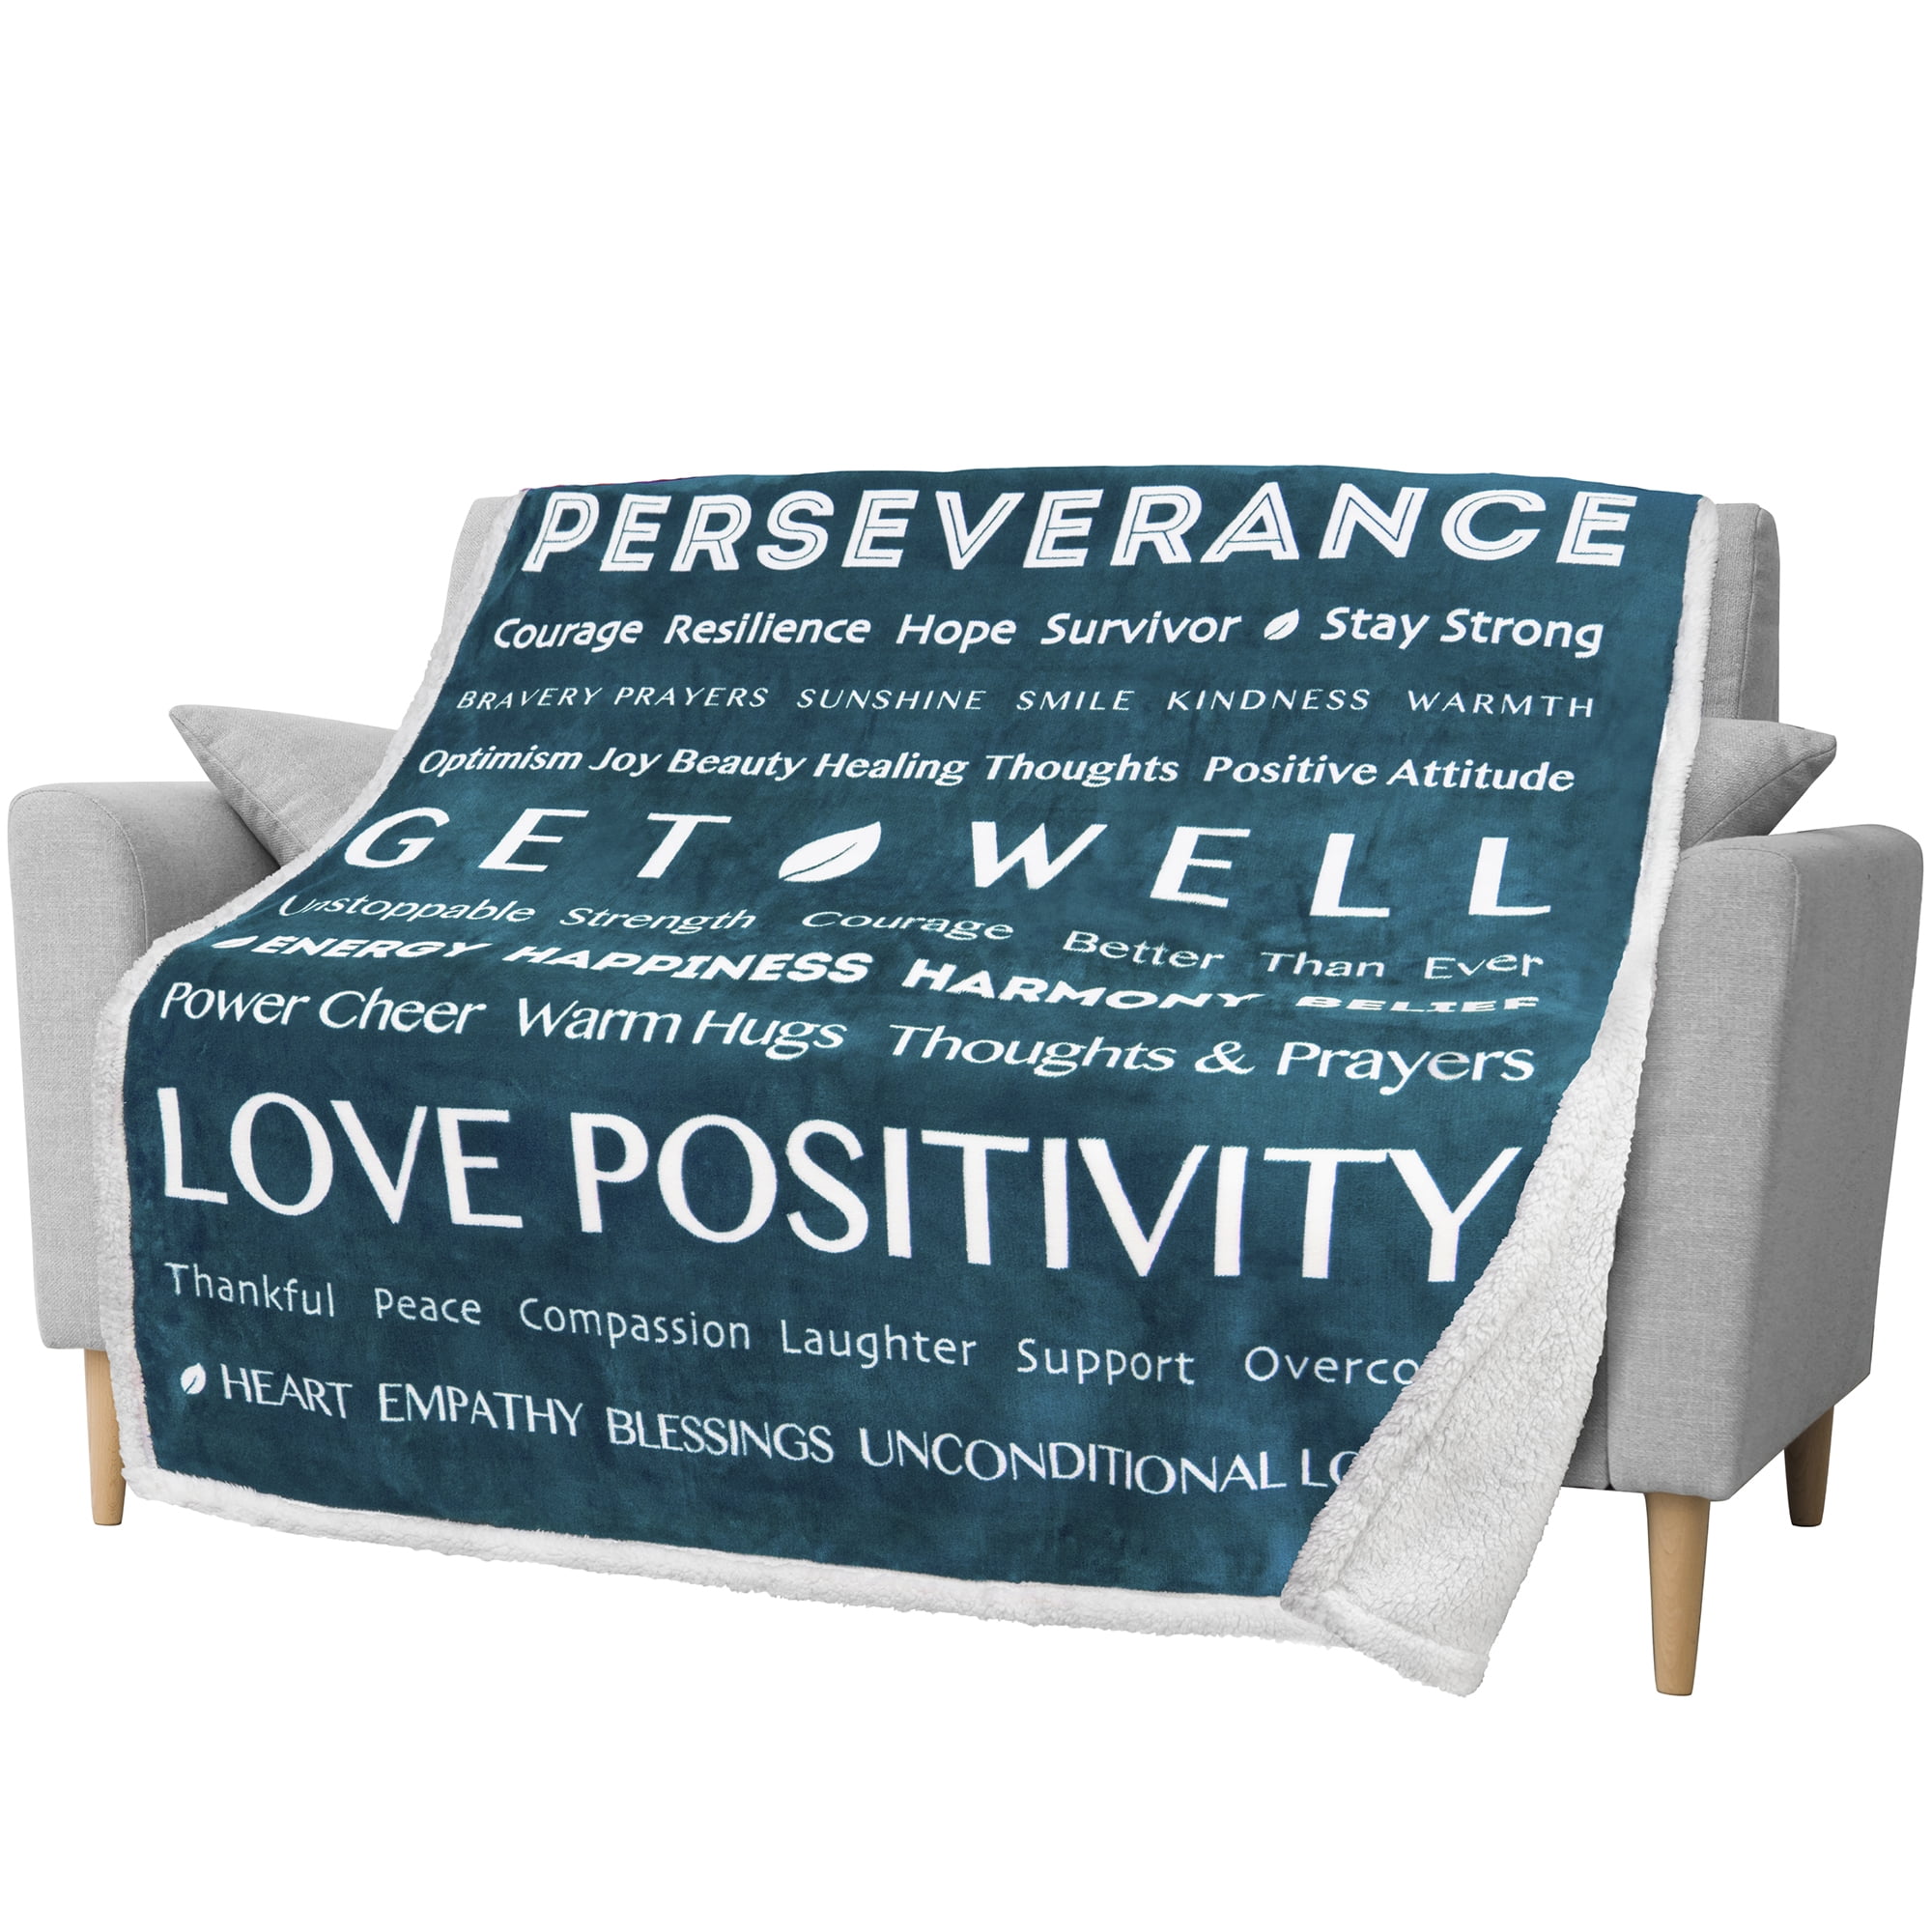 Men PAVILIA Healing Blanket Comfort Warm Hugs Inspirational Gift Get Well Soon Gift Blanket for Women Love for Recovery Soft Sherpa Fleece Throw with Positive Energy 50x60, Teal Blue